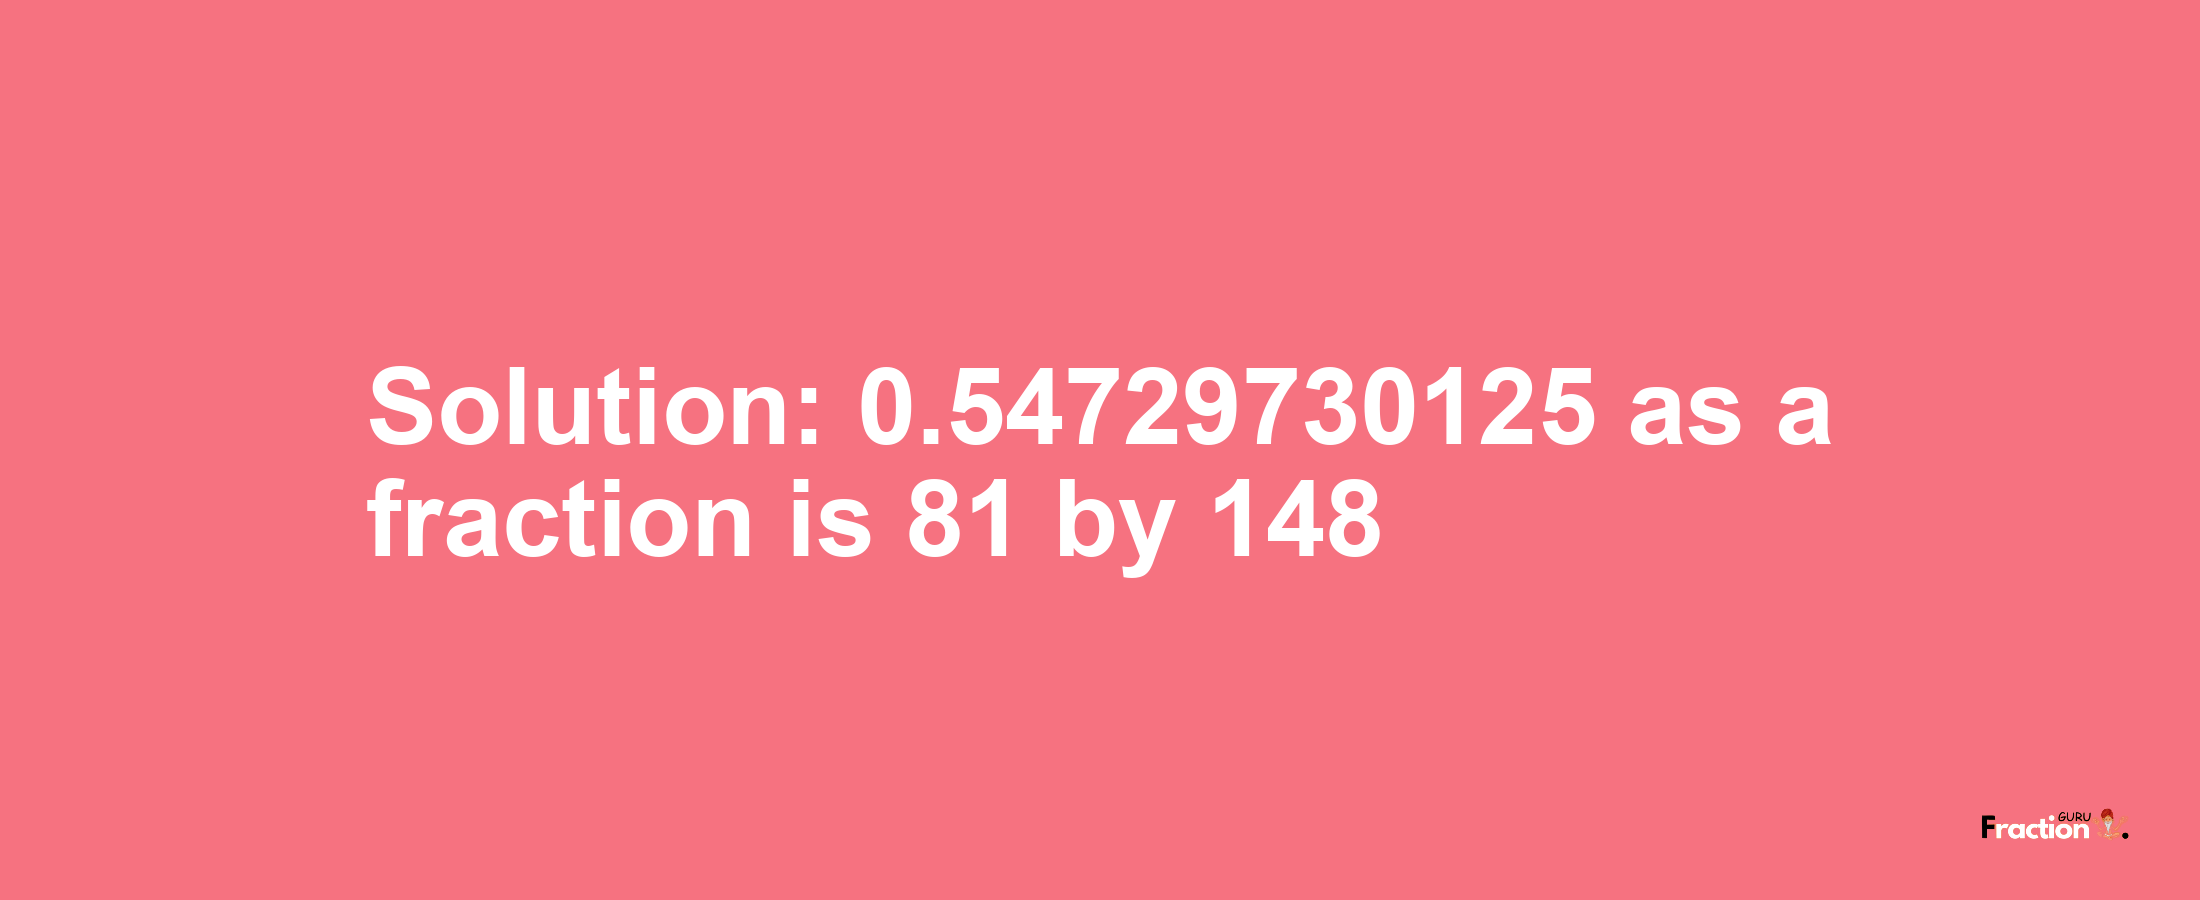 Solution:0.54729730125 as a fraction is 81/148